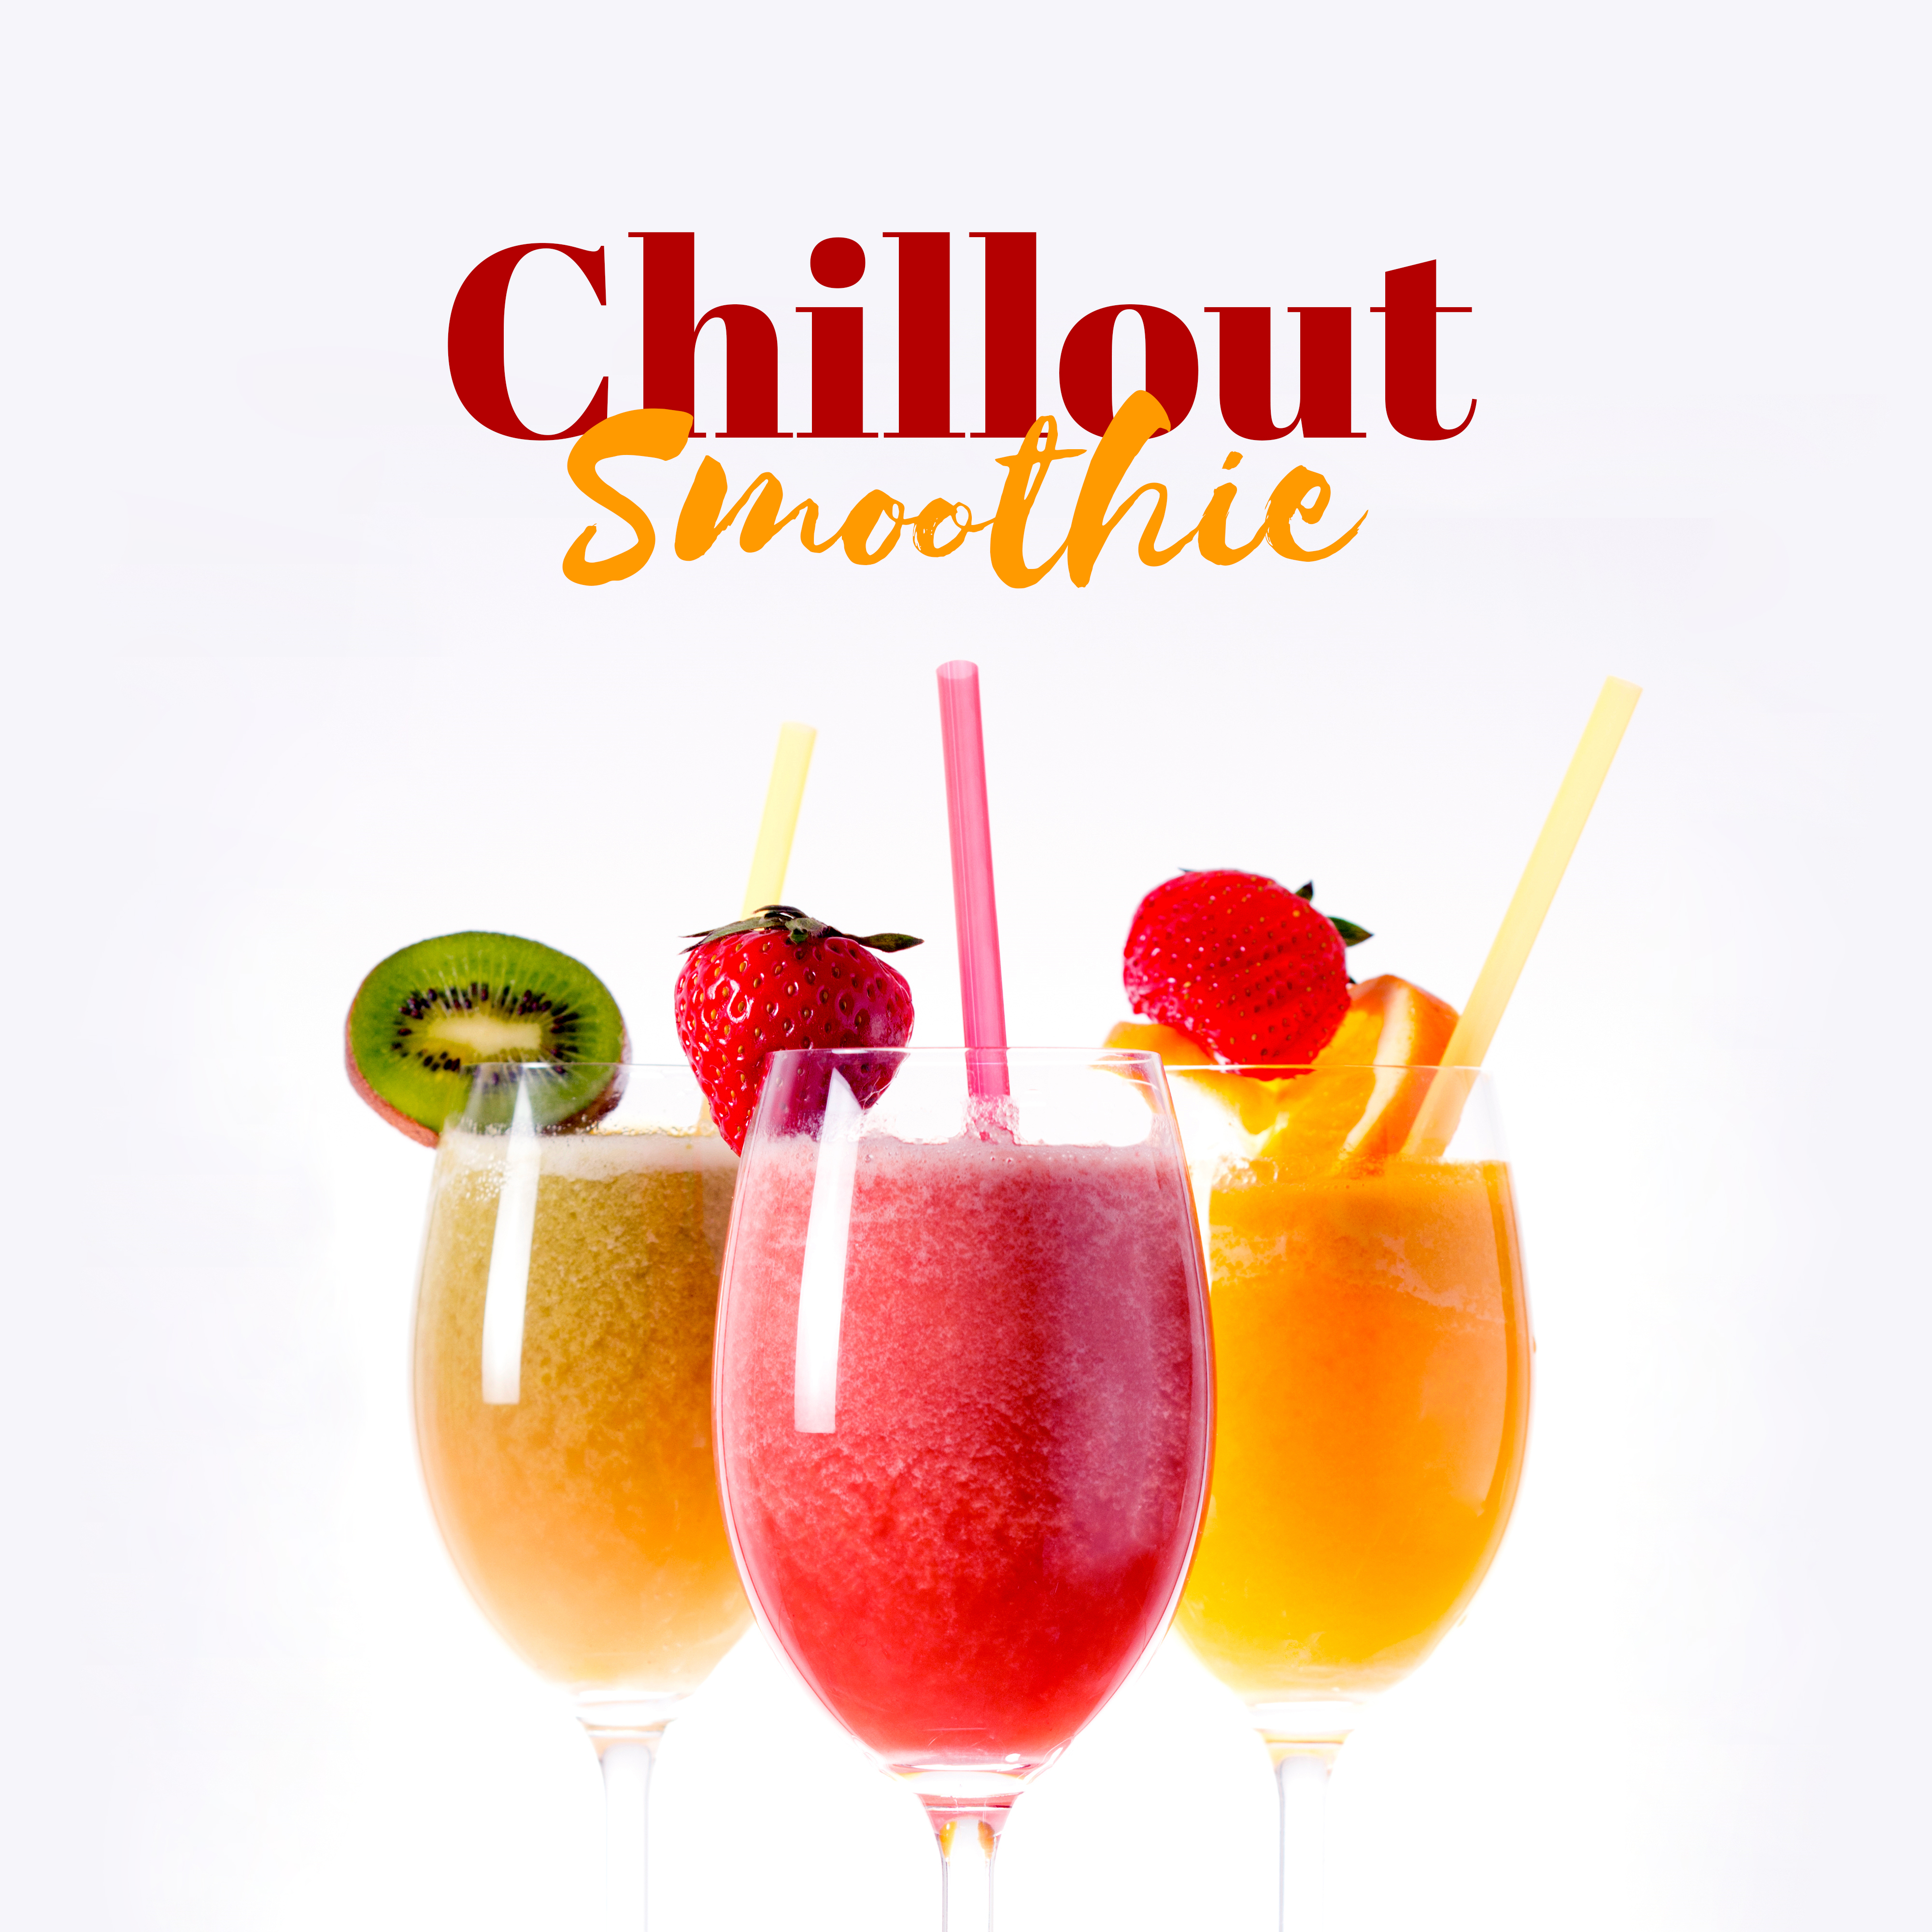 Chillout Smoothie –  Summer Hits, Breeze, Chill Out 2017, Wake Up, Relax, Chillout on the Monday